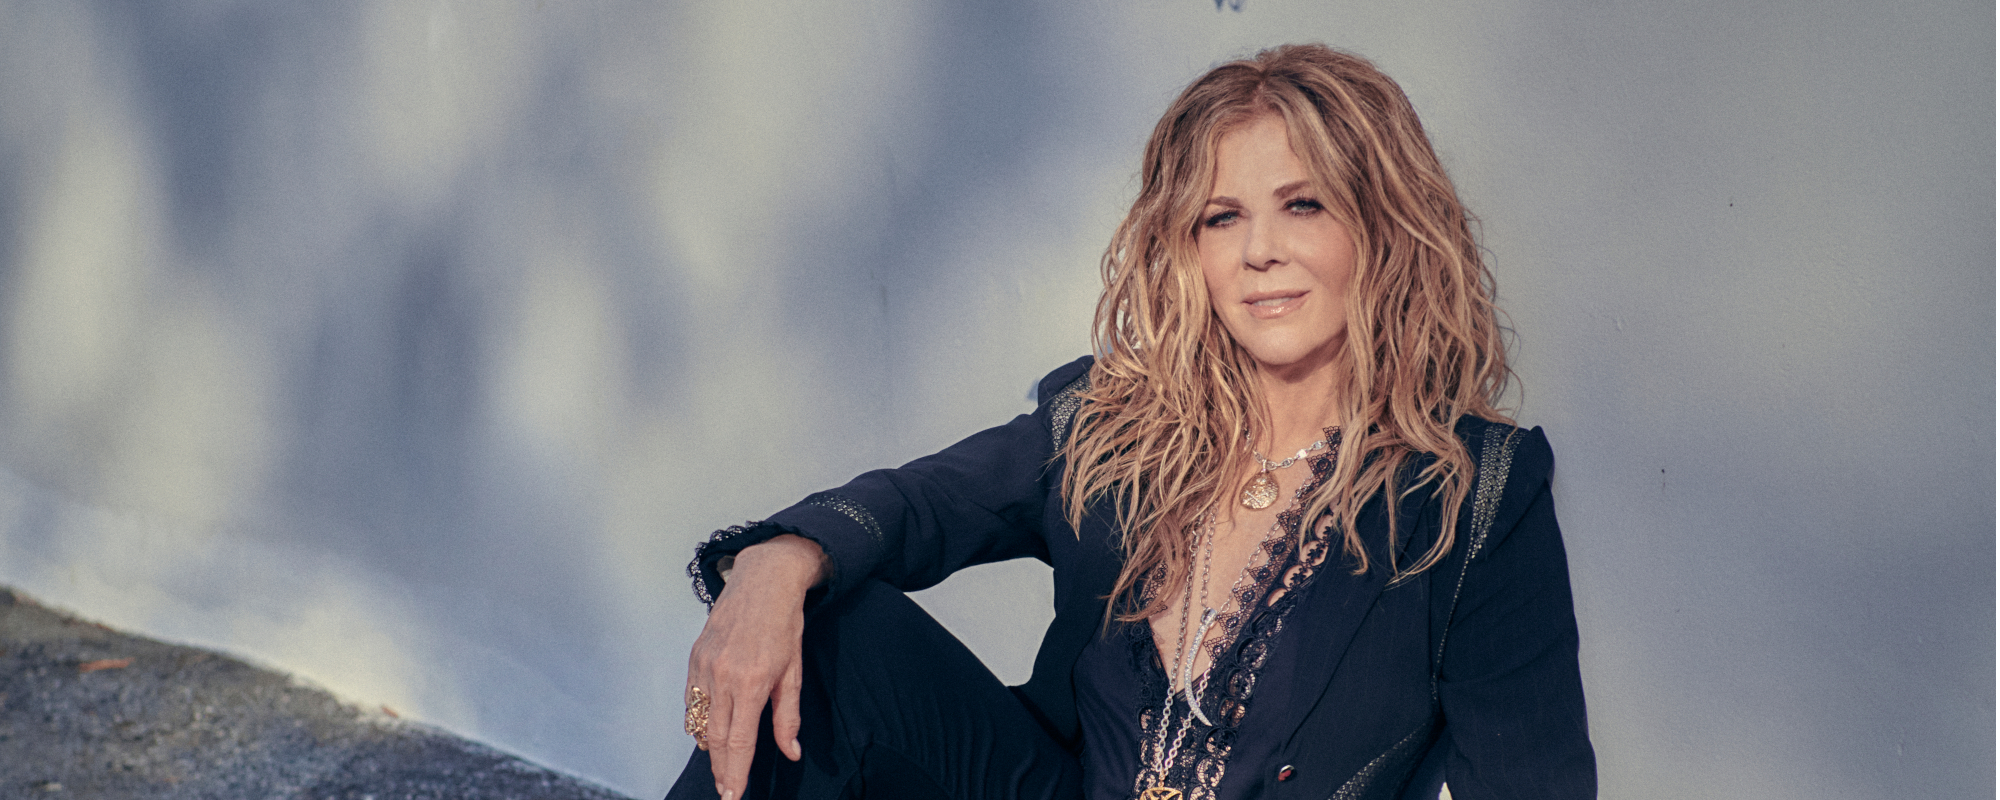 Rita Wilson Announces Album of Superstar Duets—“I Wanted to Honor Where I Came From with Songs From the Seventies”